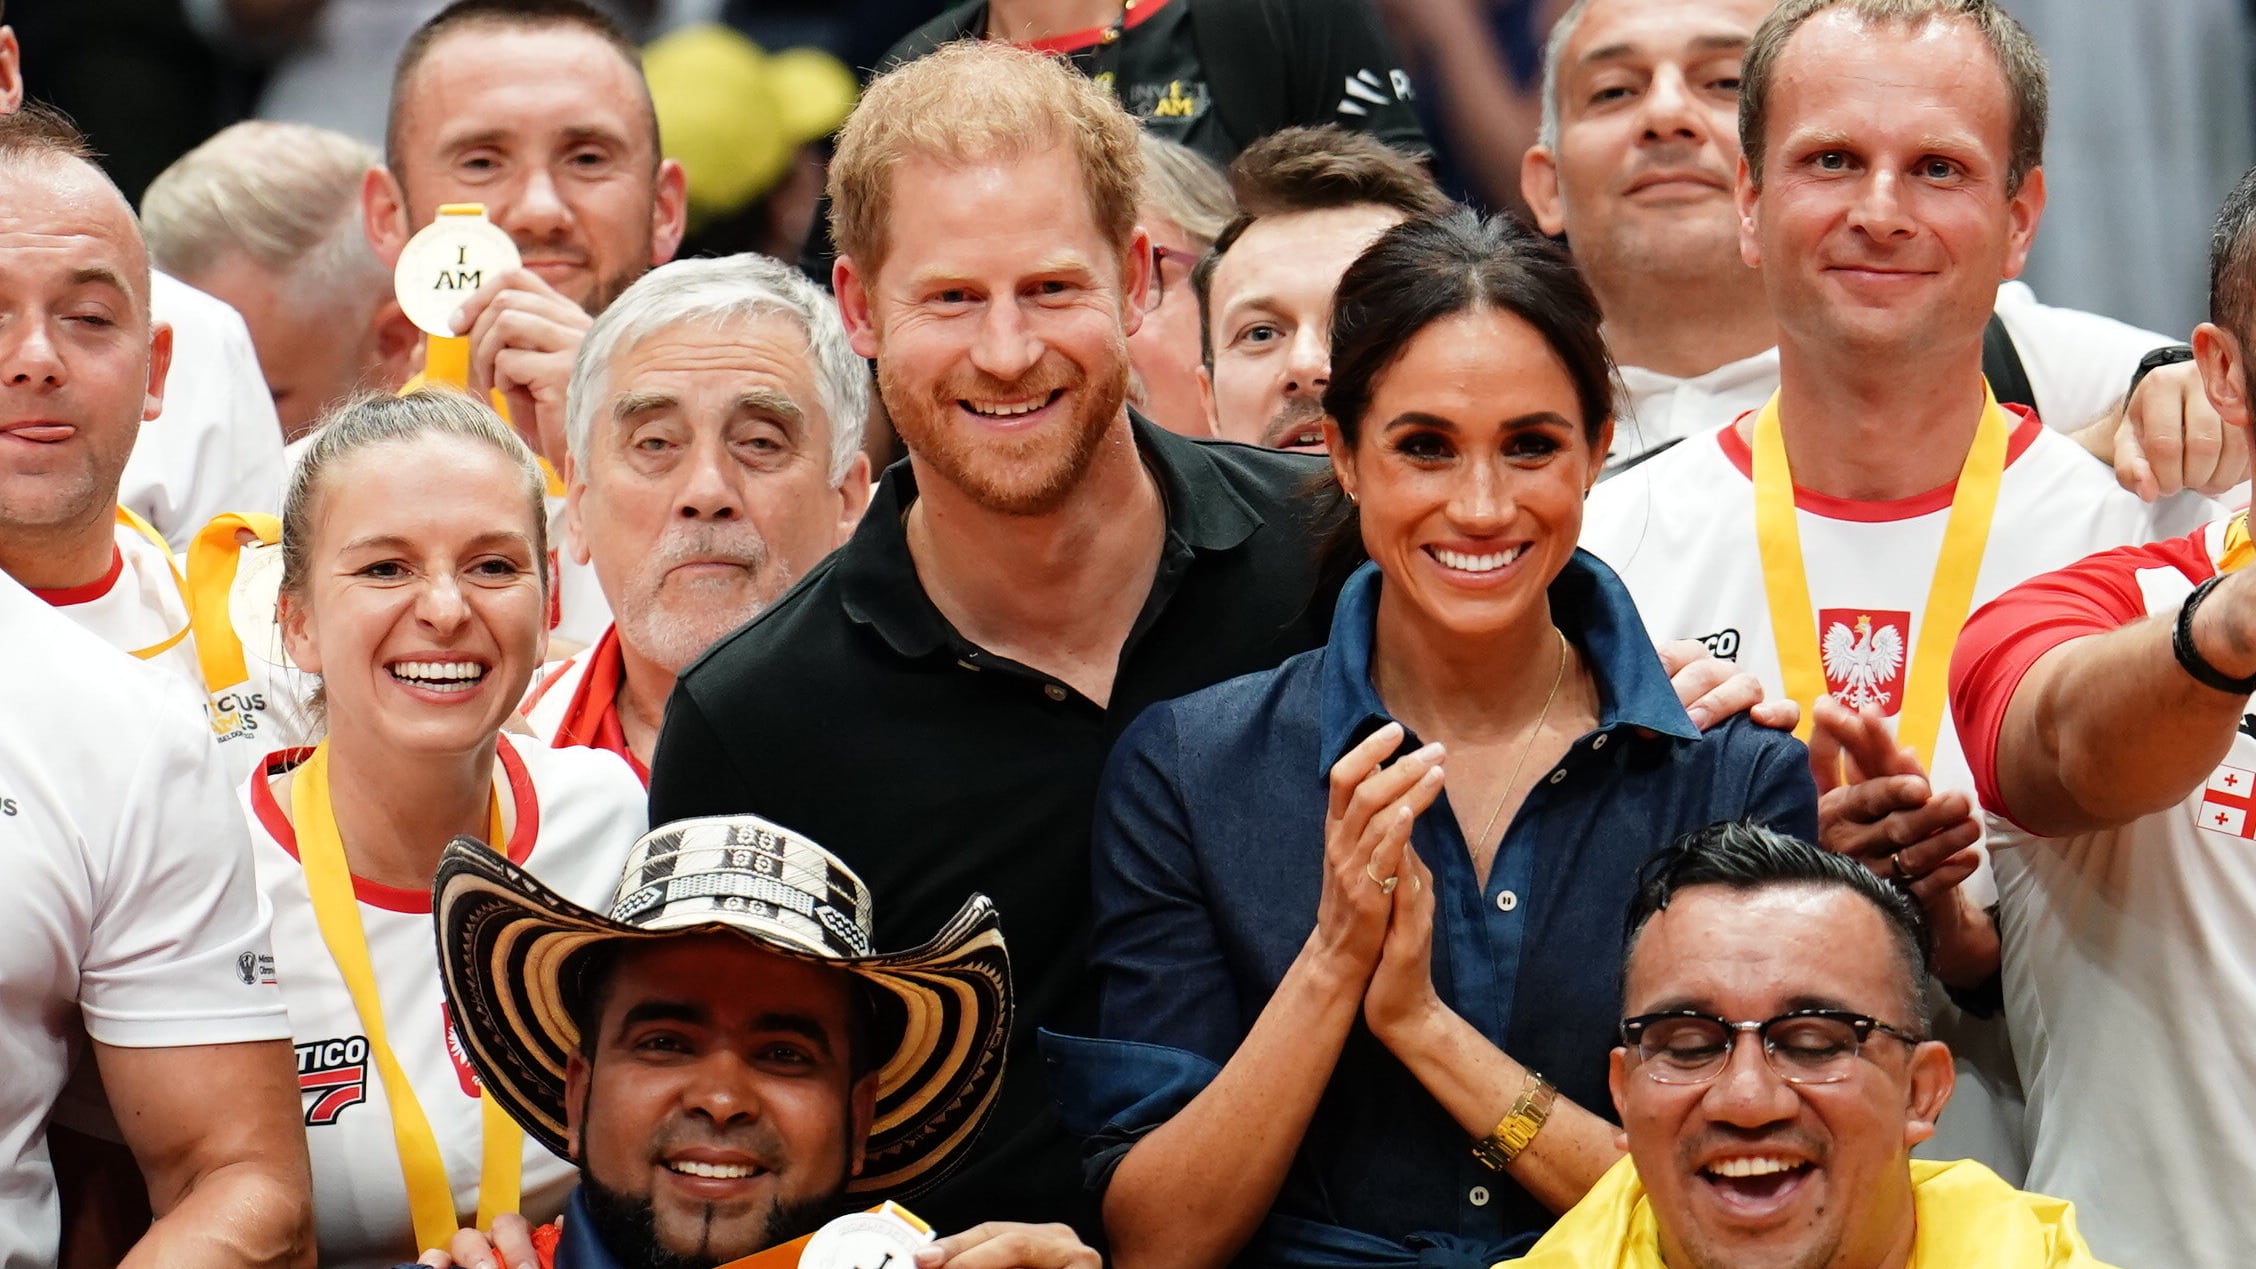 The Duke and Duchess of Sussex with medal winners during the Invictus Games in Dusseldorf, Germany